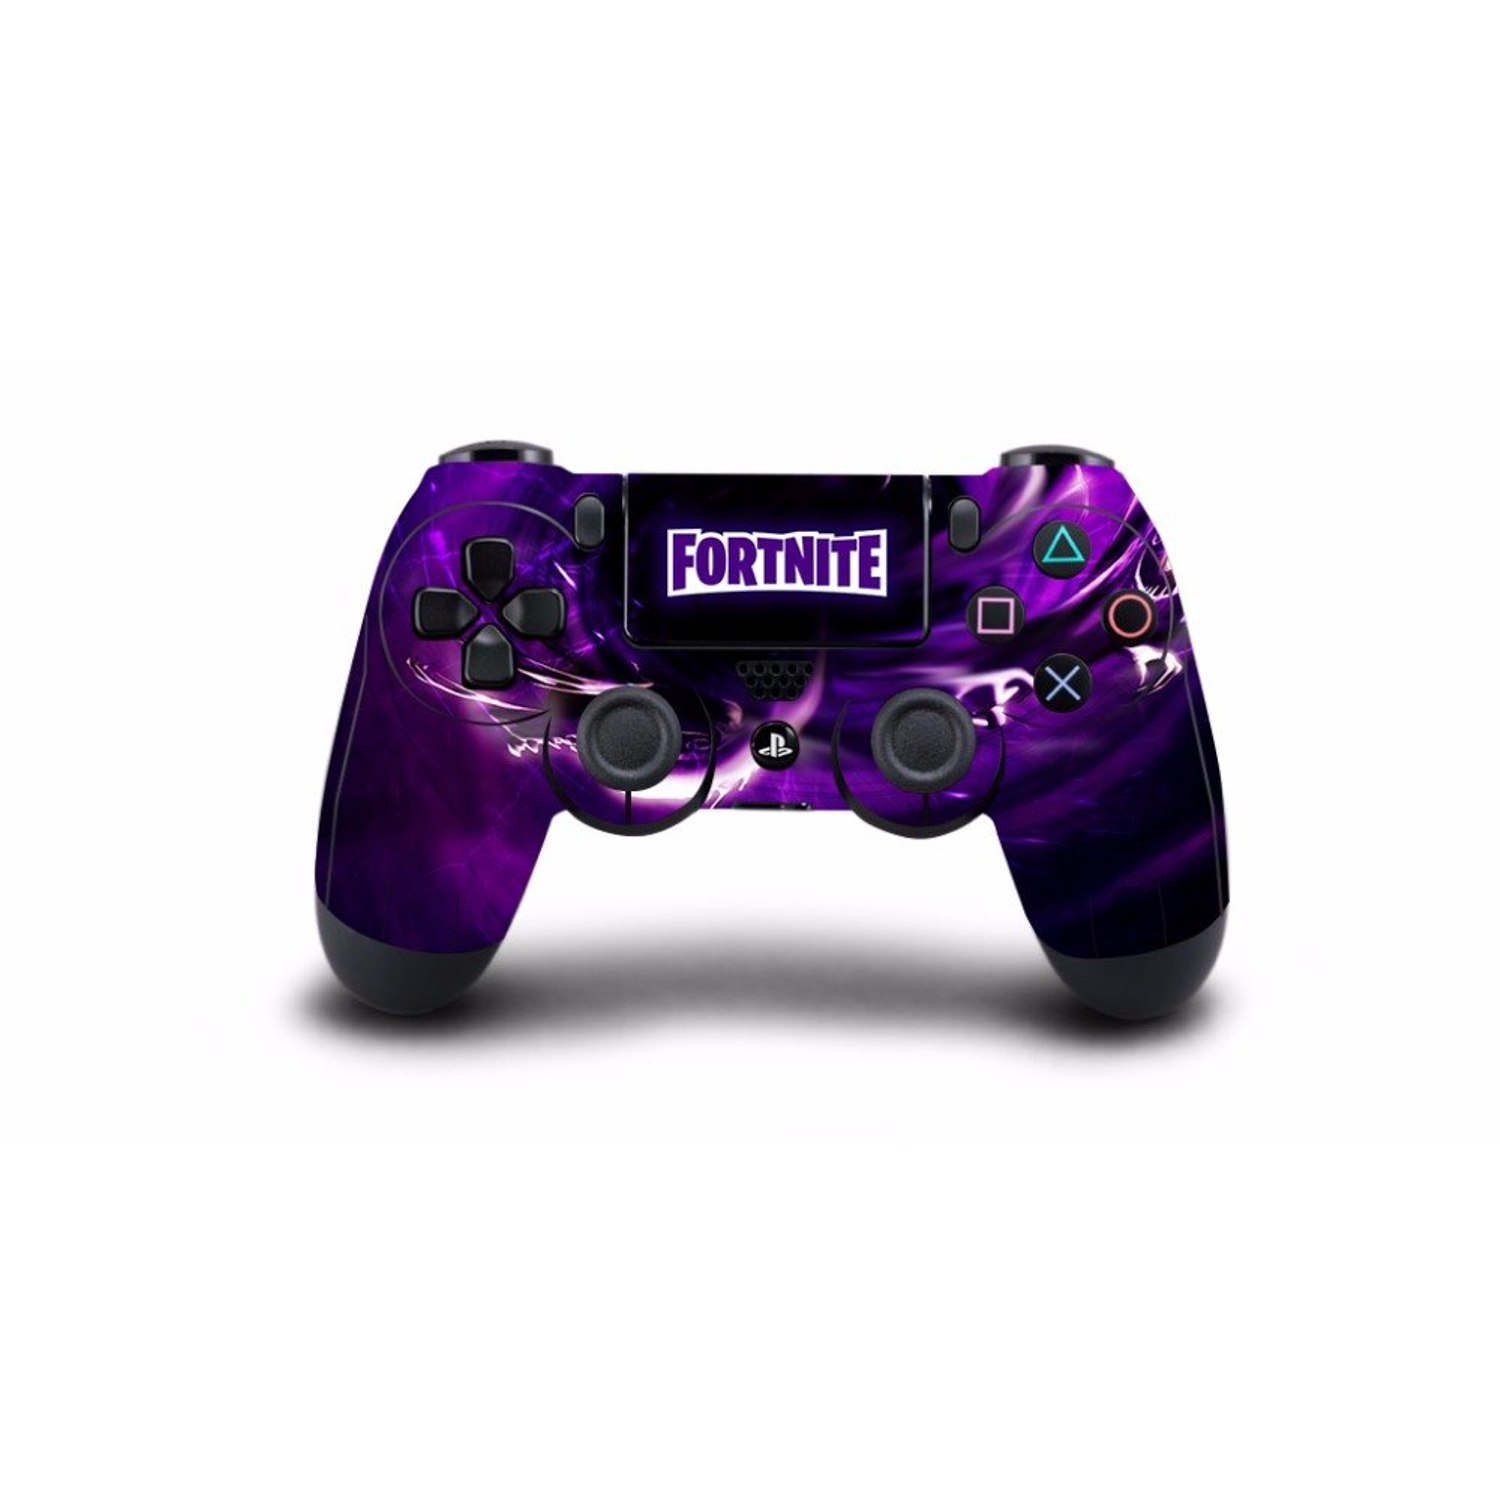 fortnite battle royale skin for dualshock 4 ps4 pro slim controller game sticker decal cover - fortnite how to get ps4 skin